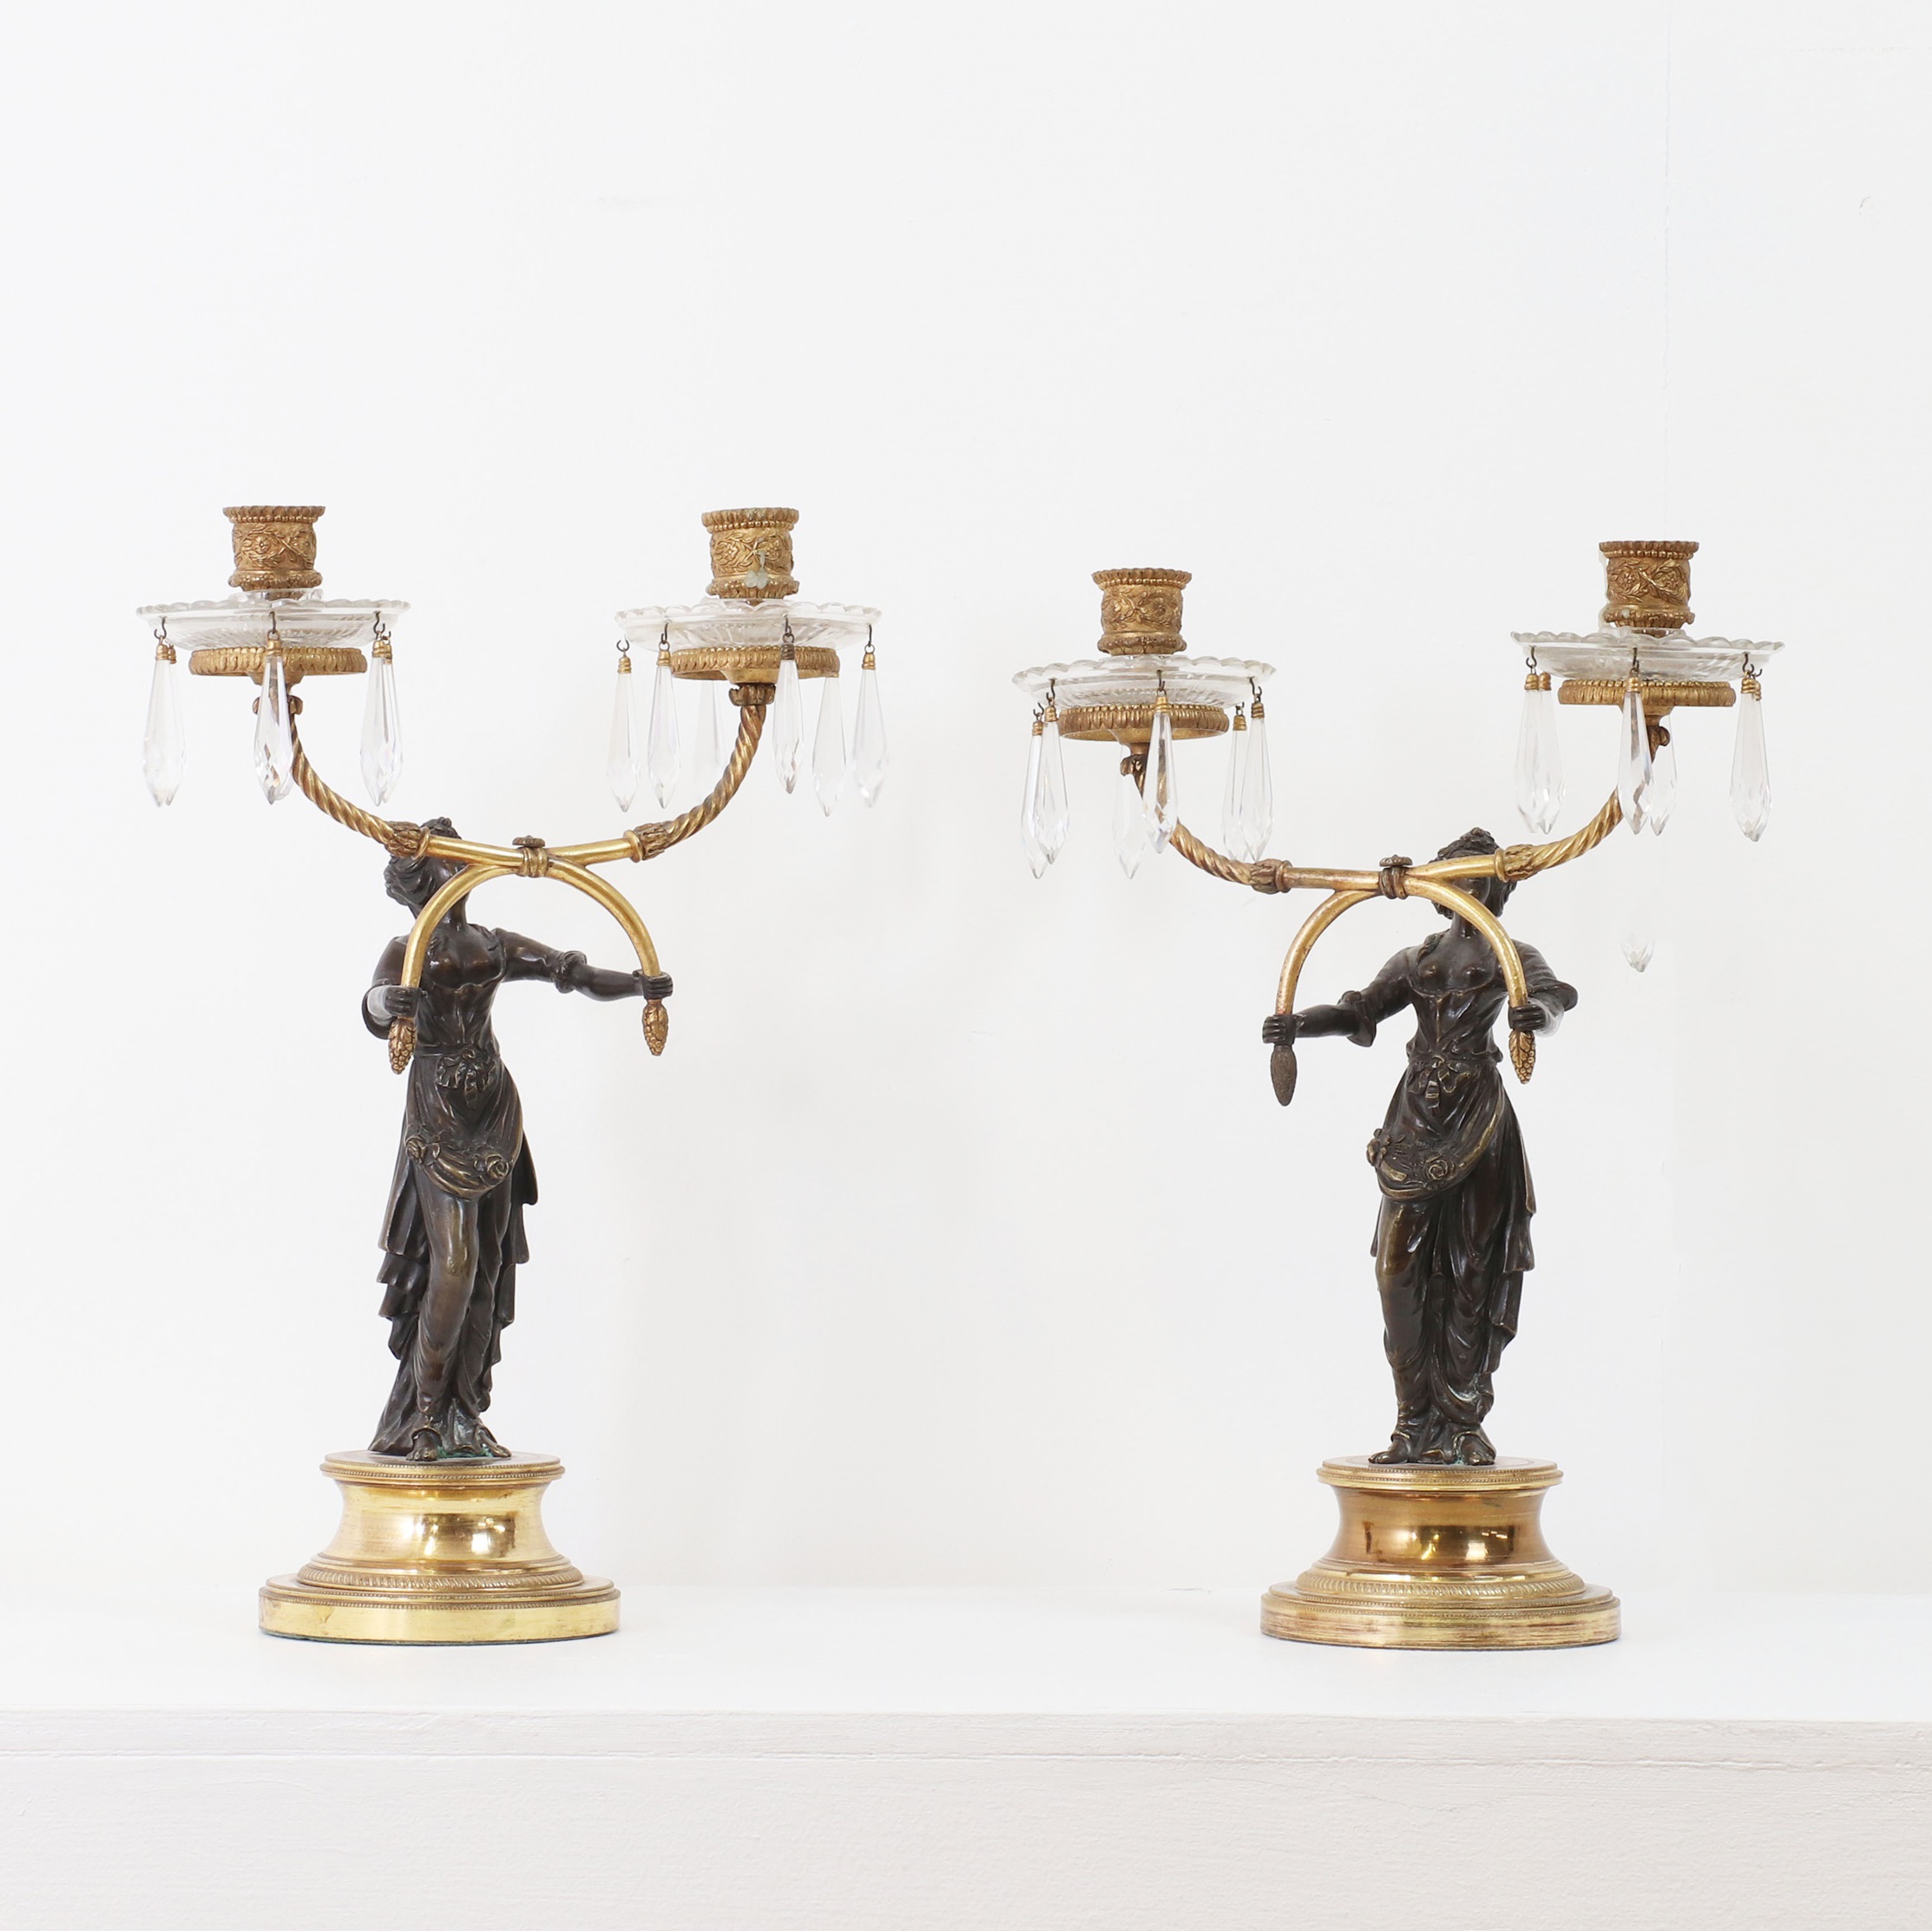 A pair of Empire-style gilt and patinated bronze candelabra, second half of the 19th century, French